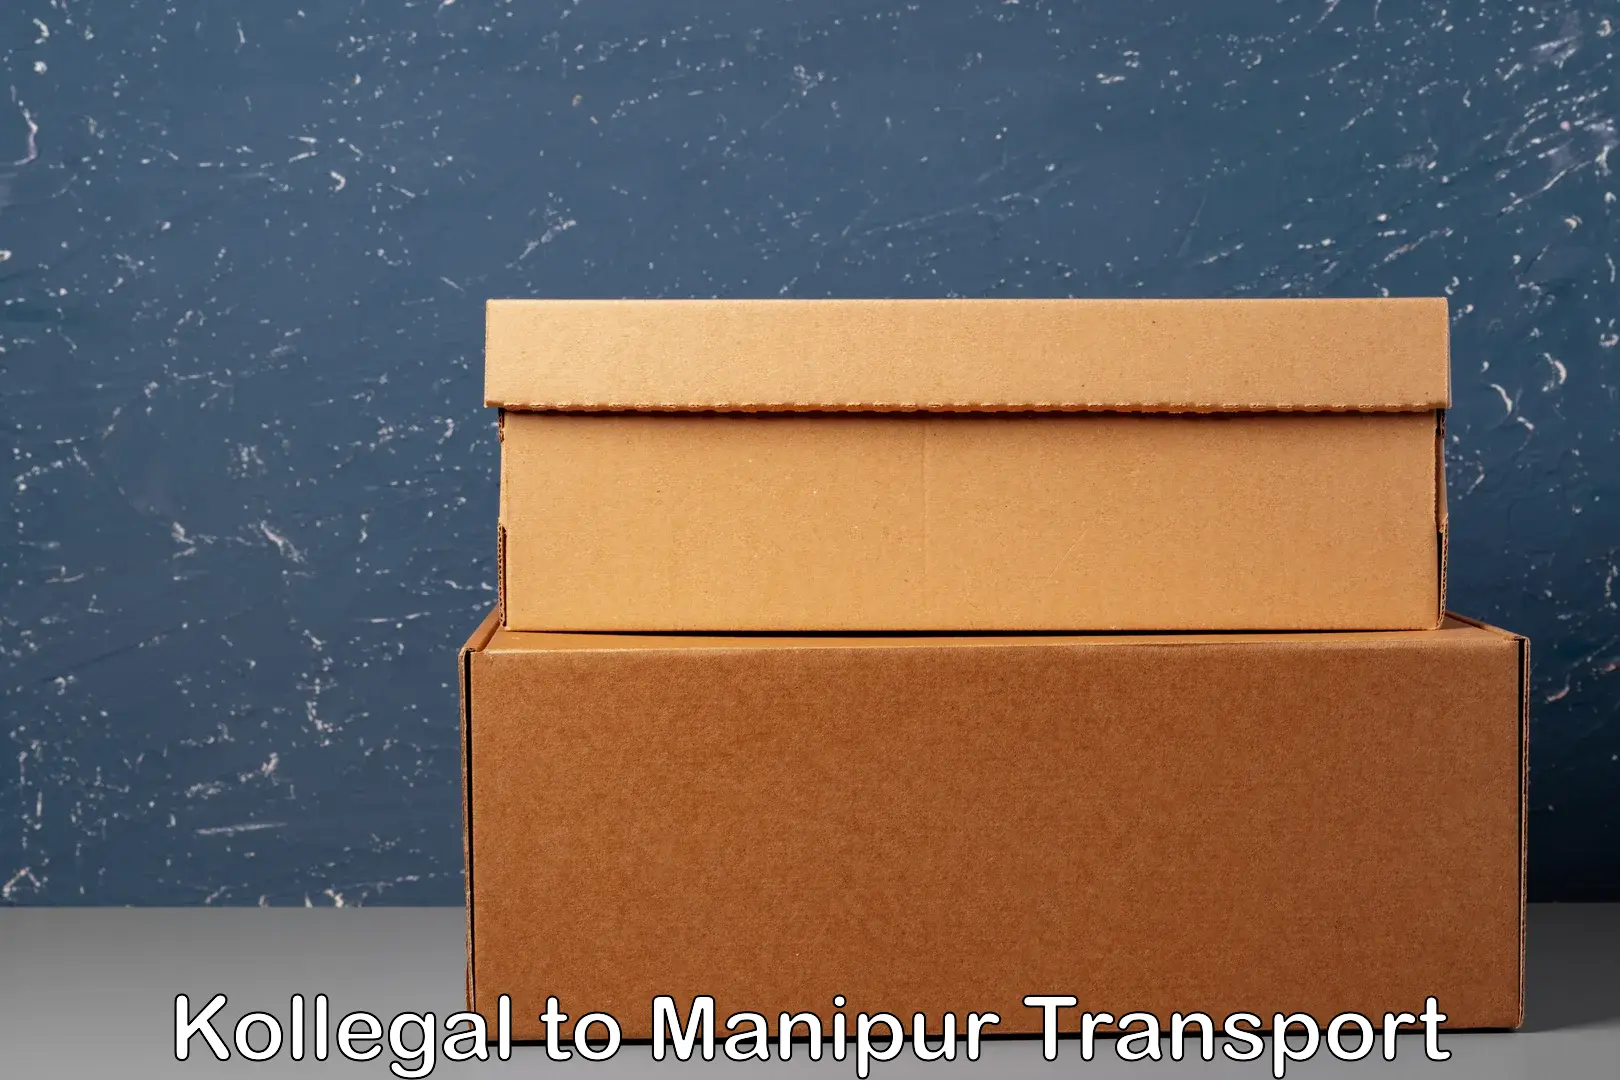 Cargo train transport services Kollegal to Manipur